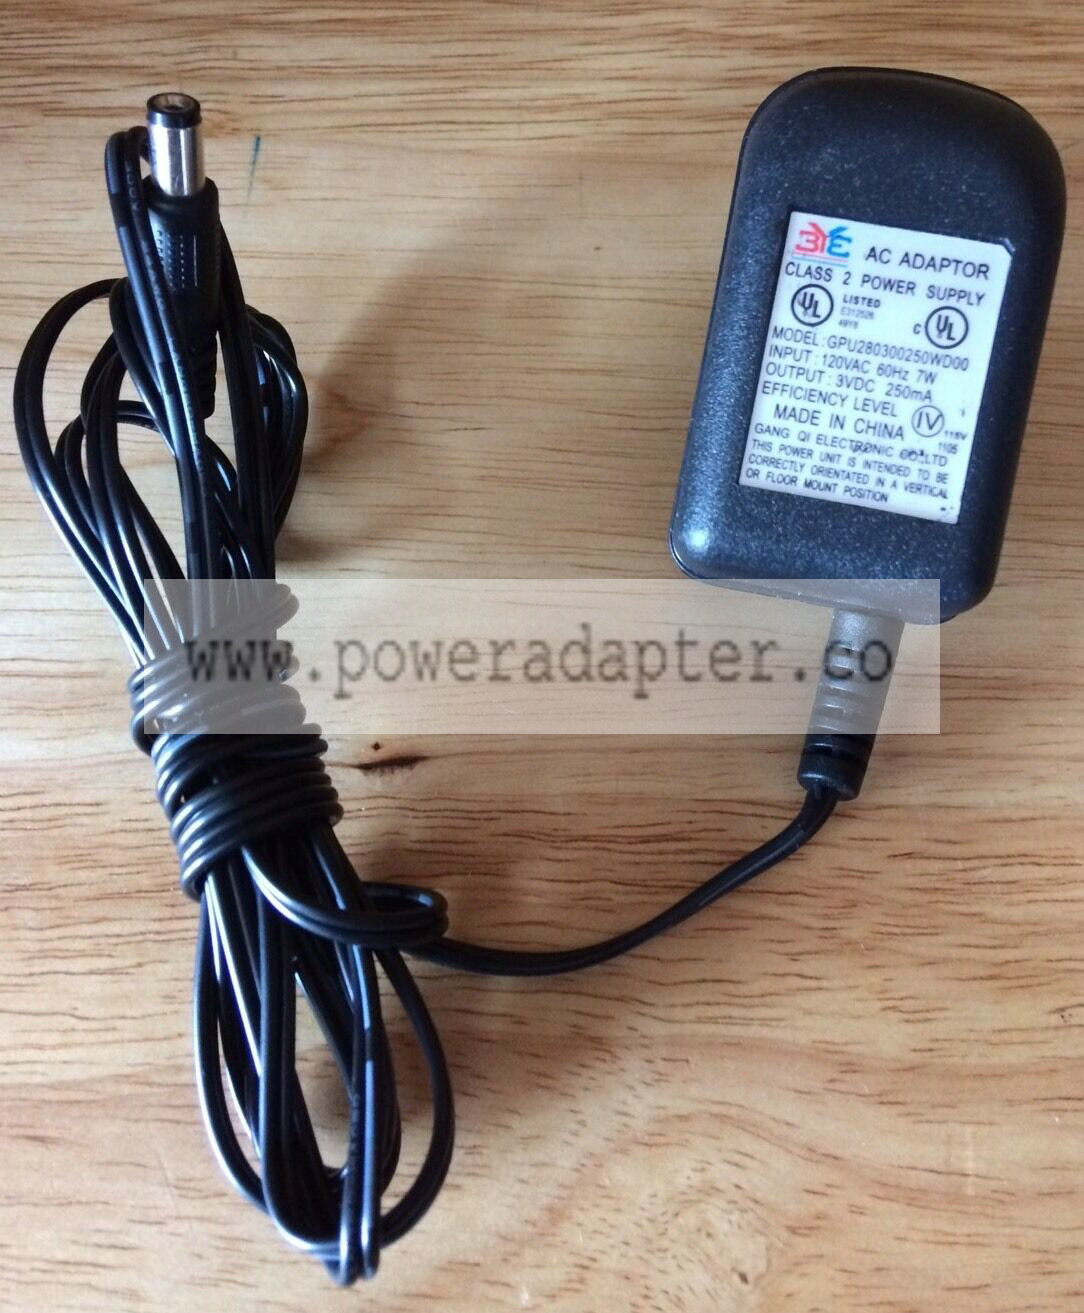 3YE GPU280300250WD00 AC Power Adapter 3VDC~250mA~7W~Tested Brand: 3YE Type: AC Adapter Output Voltage: 3V, 250mA, 7W